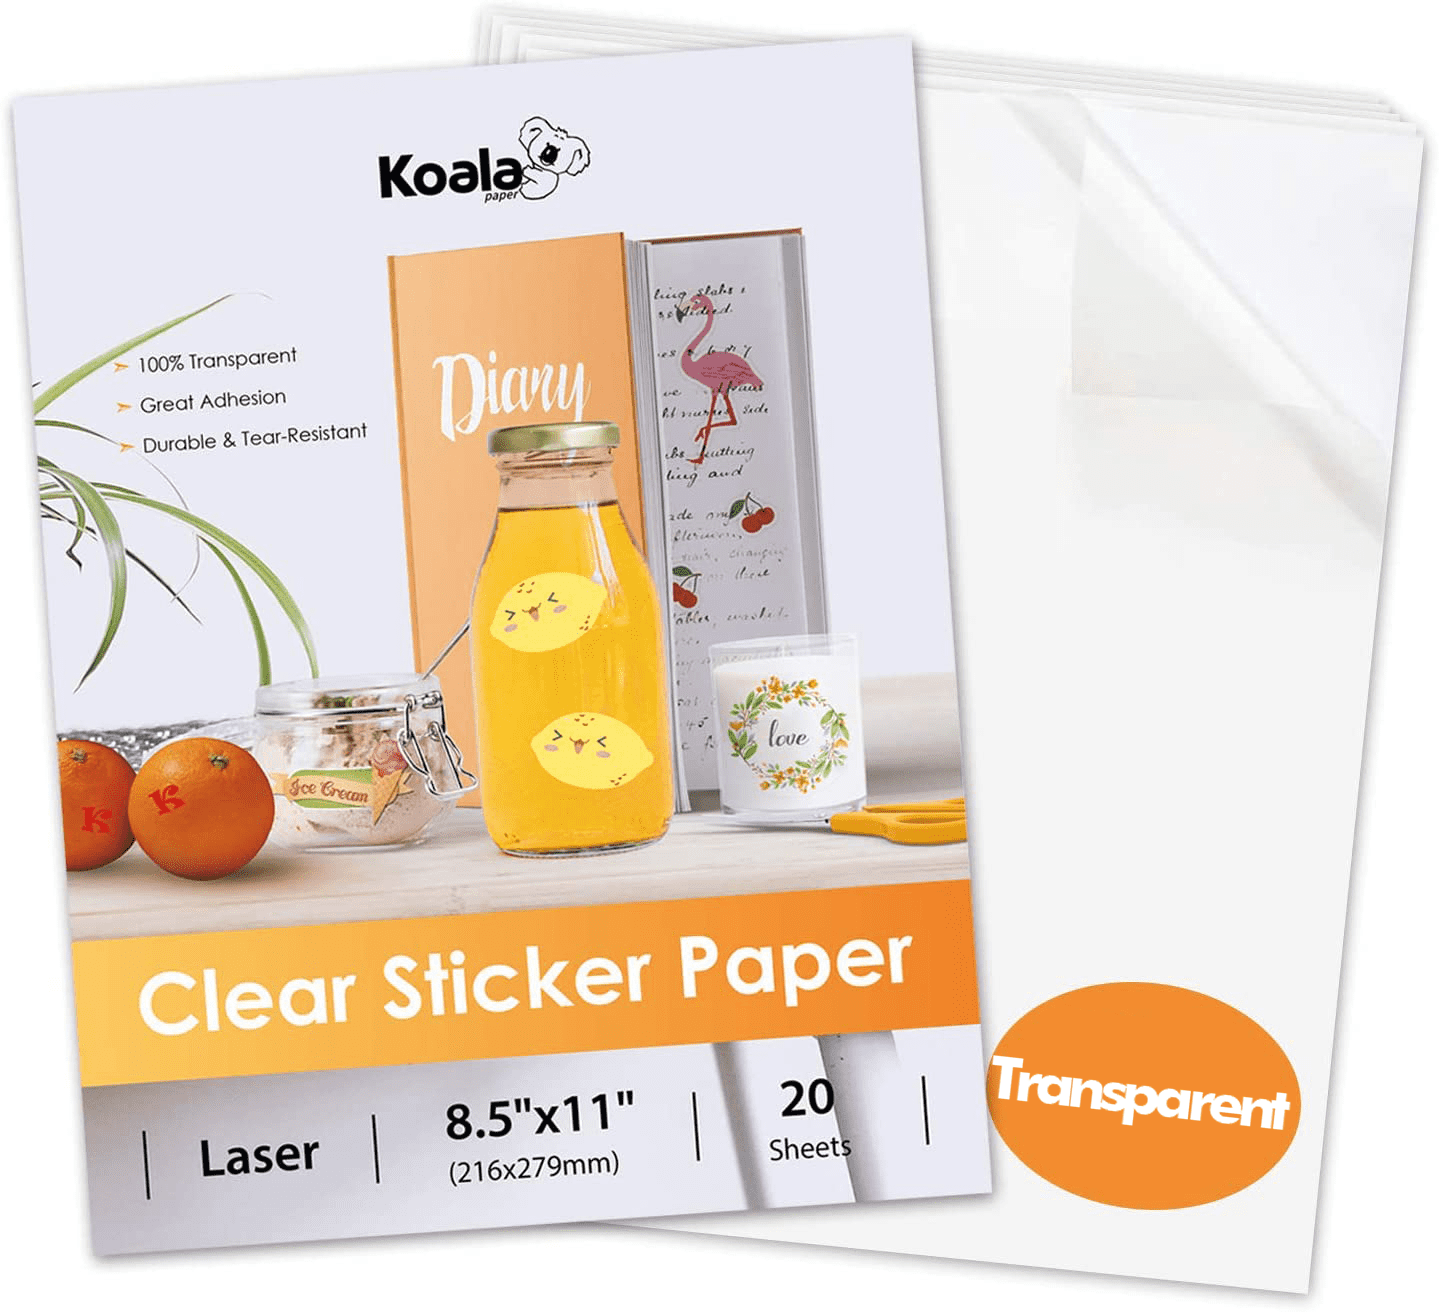 What is the Best Clear Sticker Paper for Printing Stickers